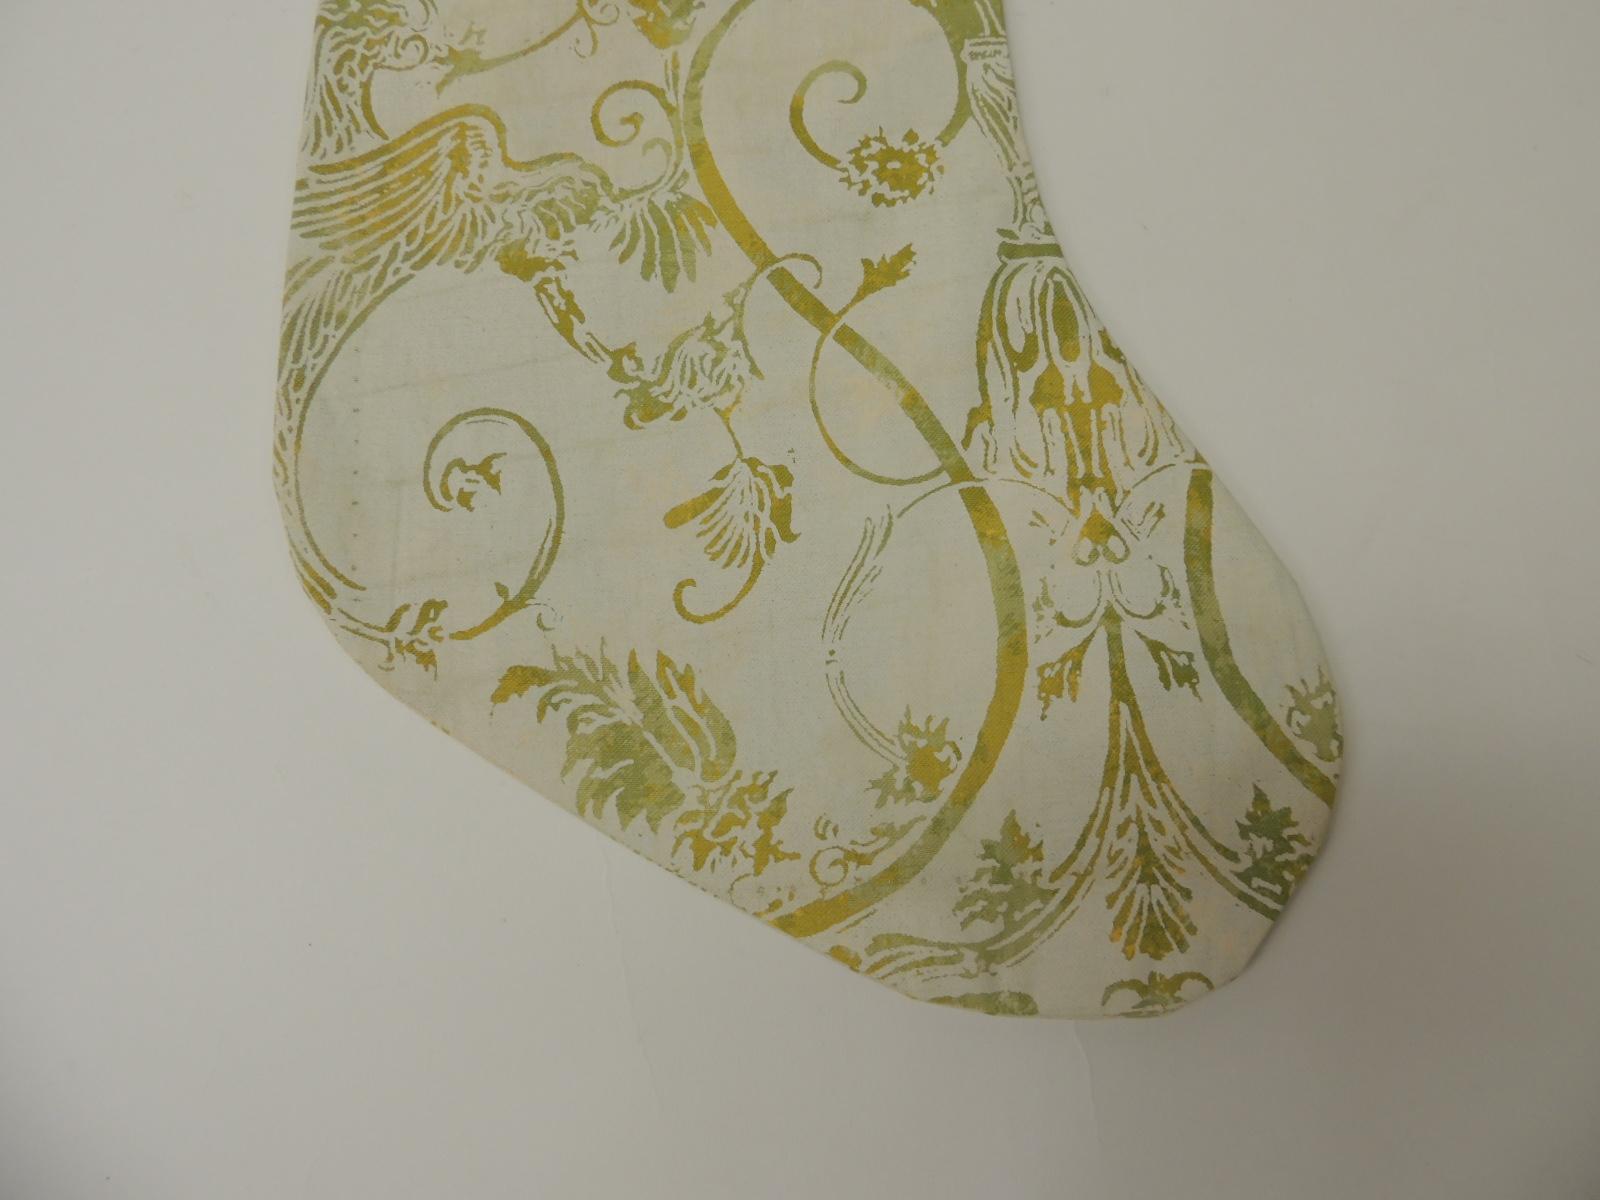 Artisanal holiday gift stocking.
Vintage Fortuny style screen printed in the USA, depicting birds of paradise and vines.
Doubled-sided, embellished with cotton green ribbon same as hanging hook.
Interlined with cotton fabric.
Limited edition of